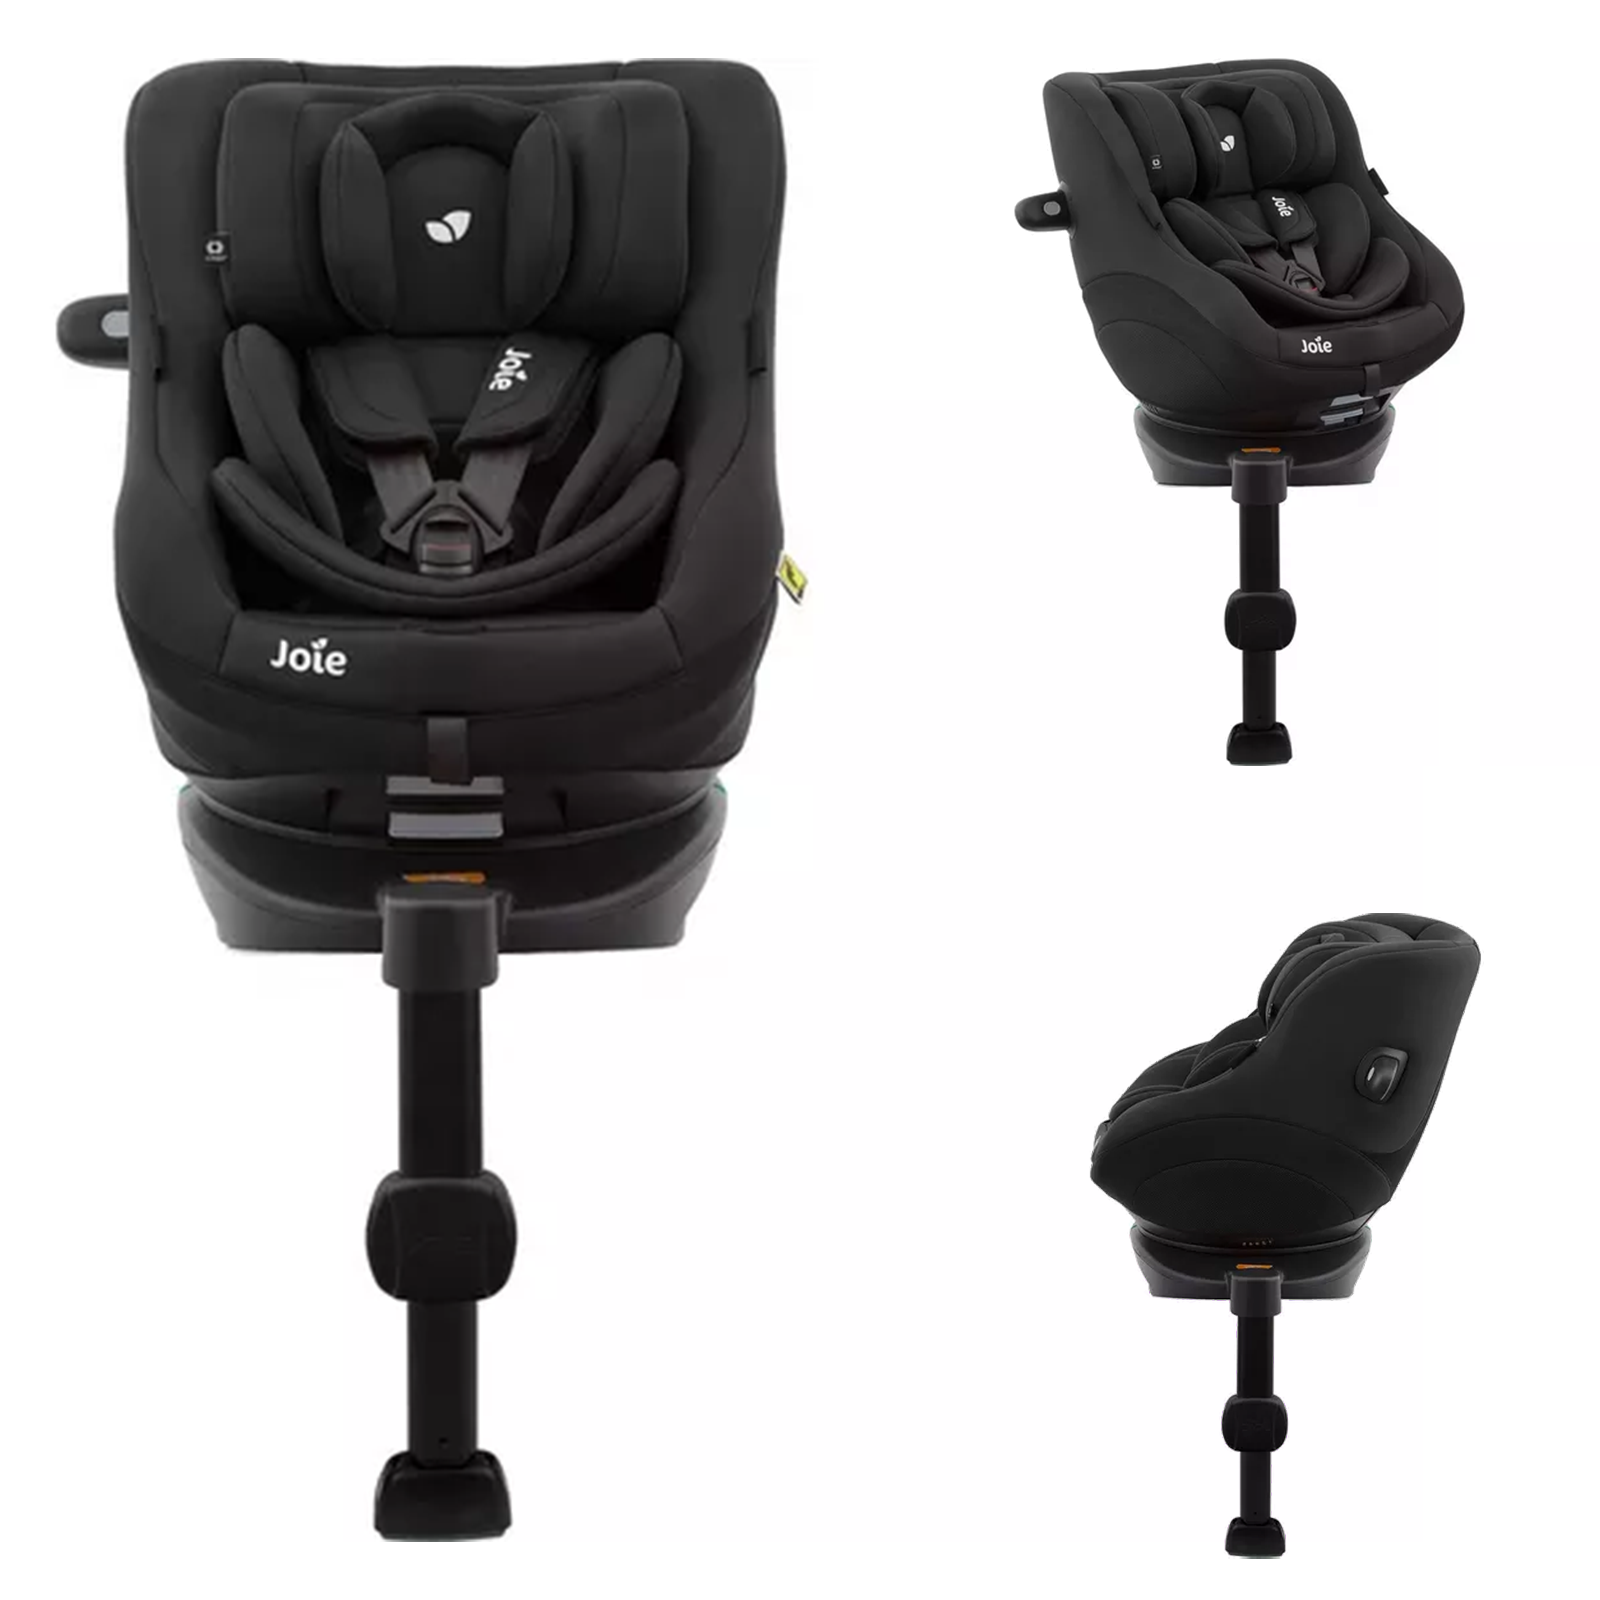 Joie i-Size Spin 360° GTI Group 0+/1 ISOFIX Car Seat - Shale (0-4 Years)